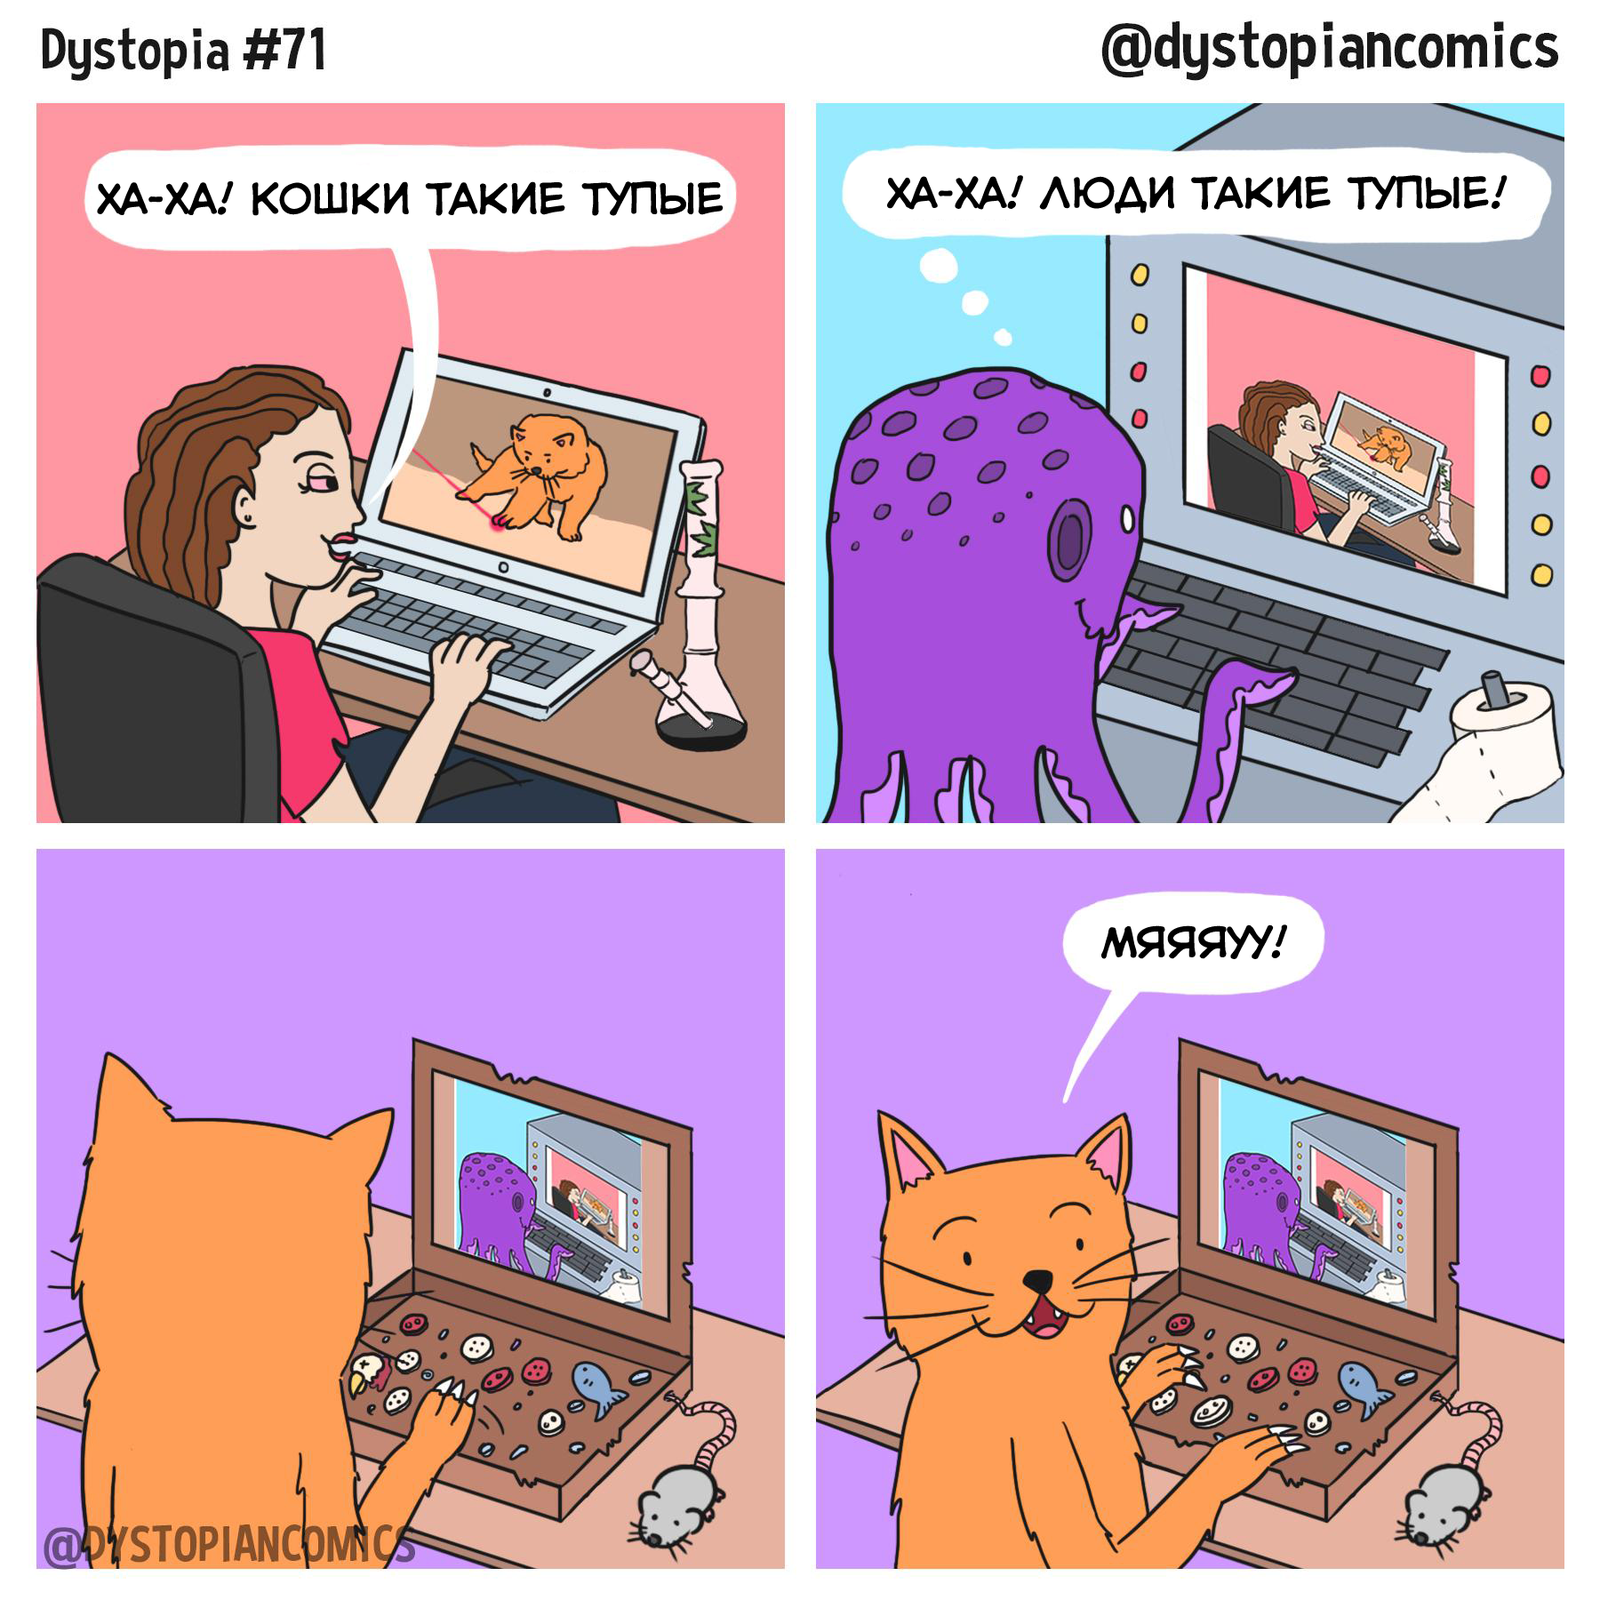 Videos with cats - Comics, Dystopia, Translation, People, Aliens, cat, Mouse